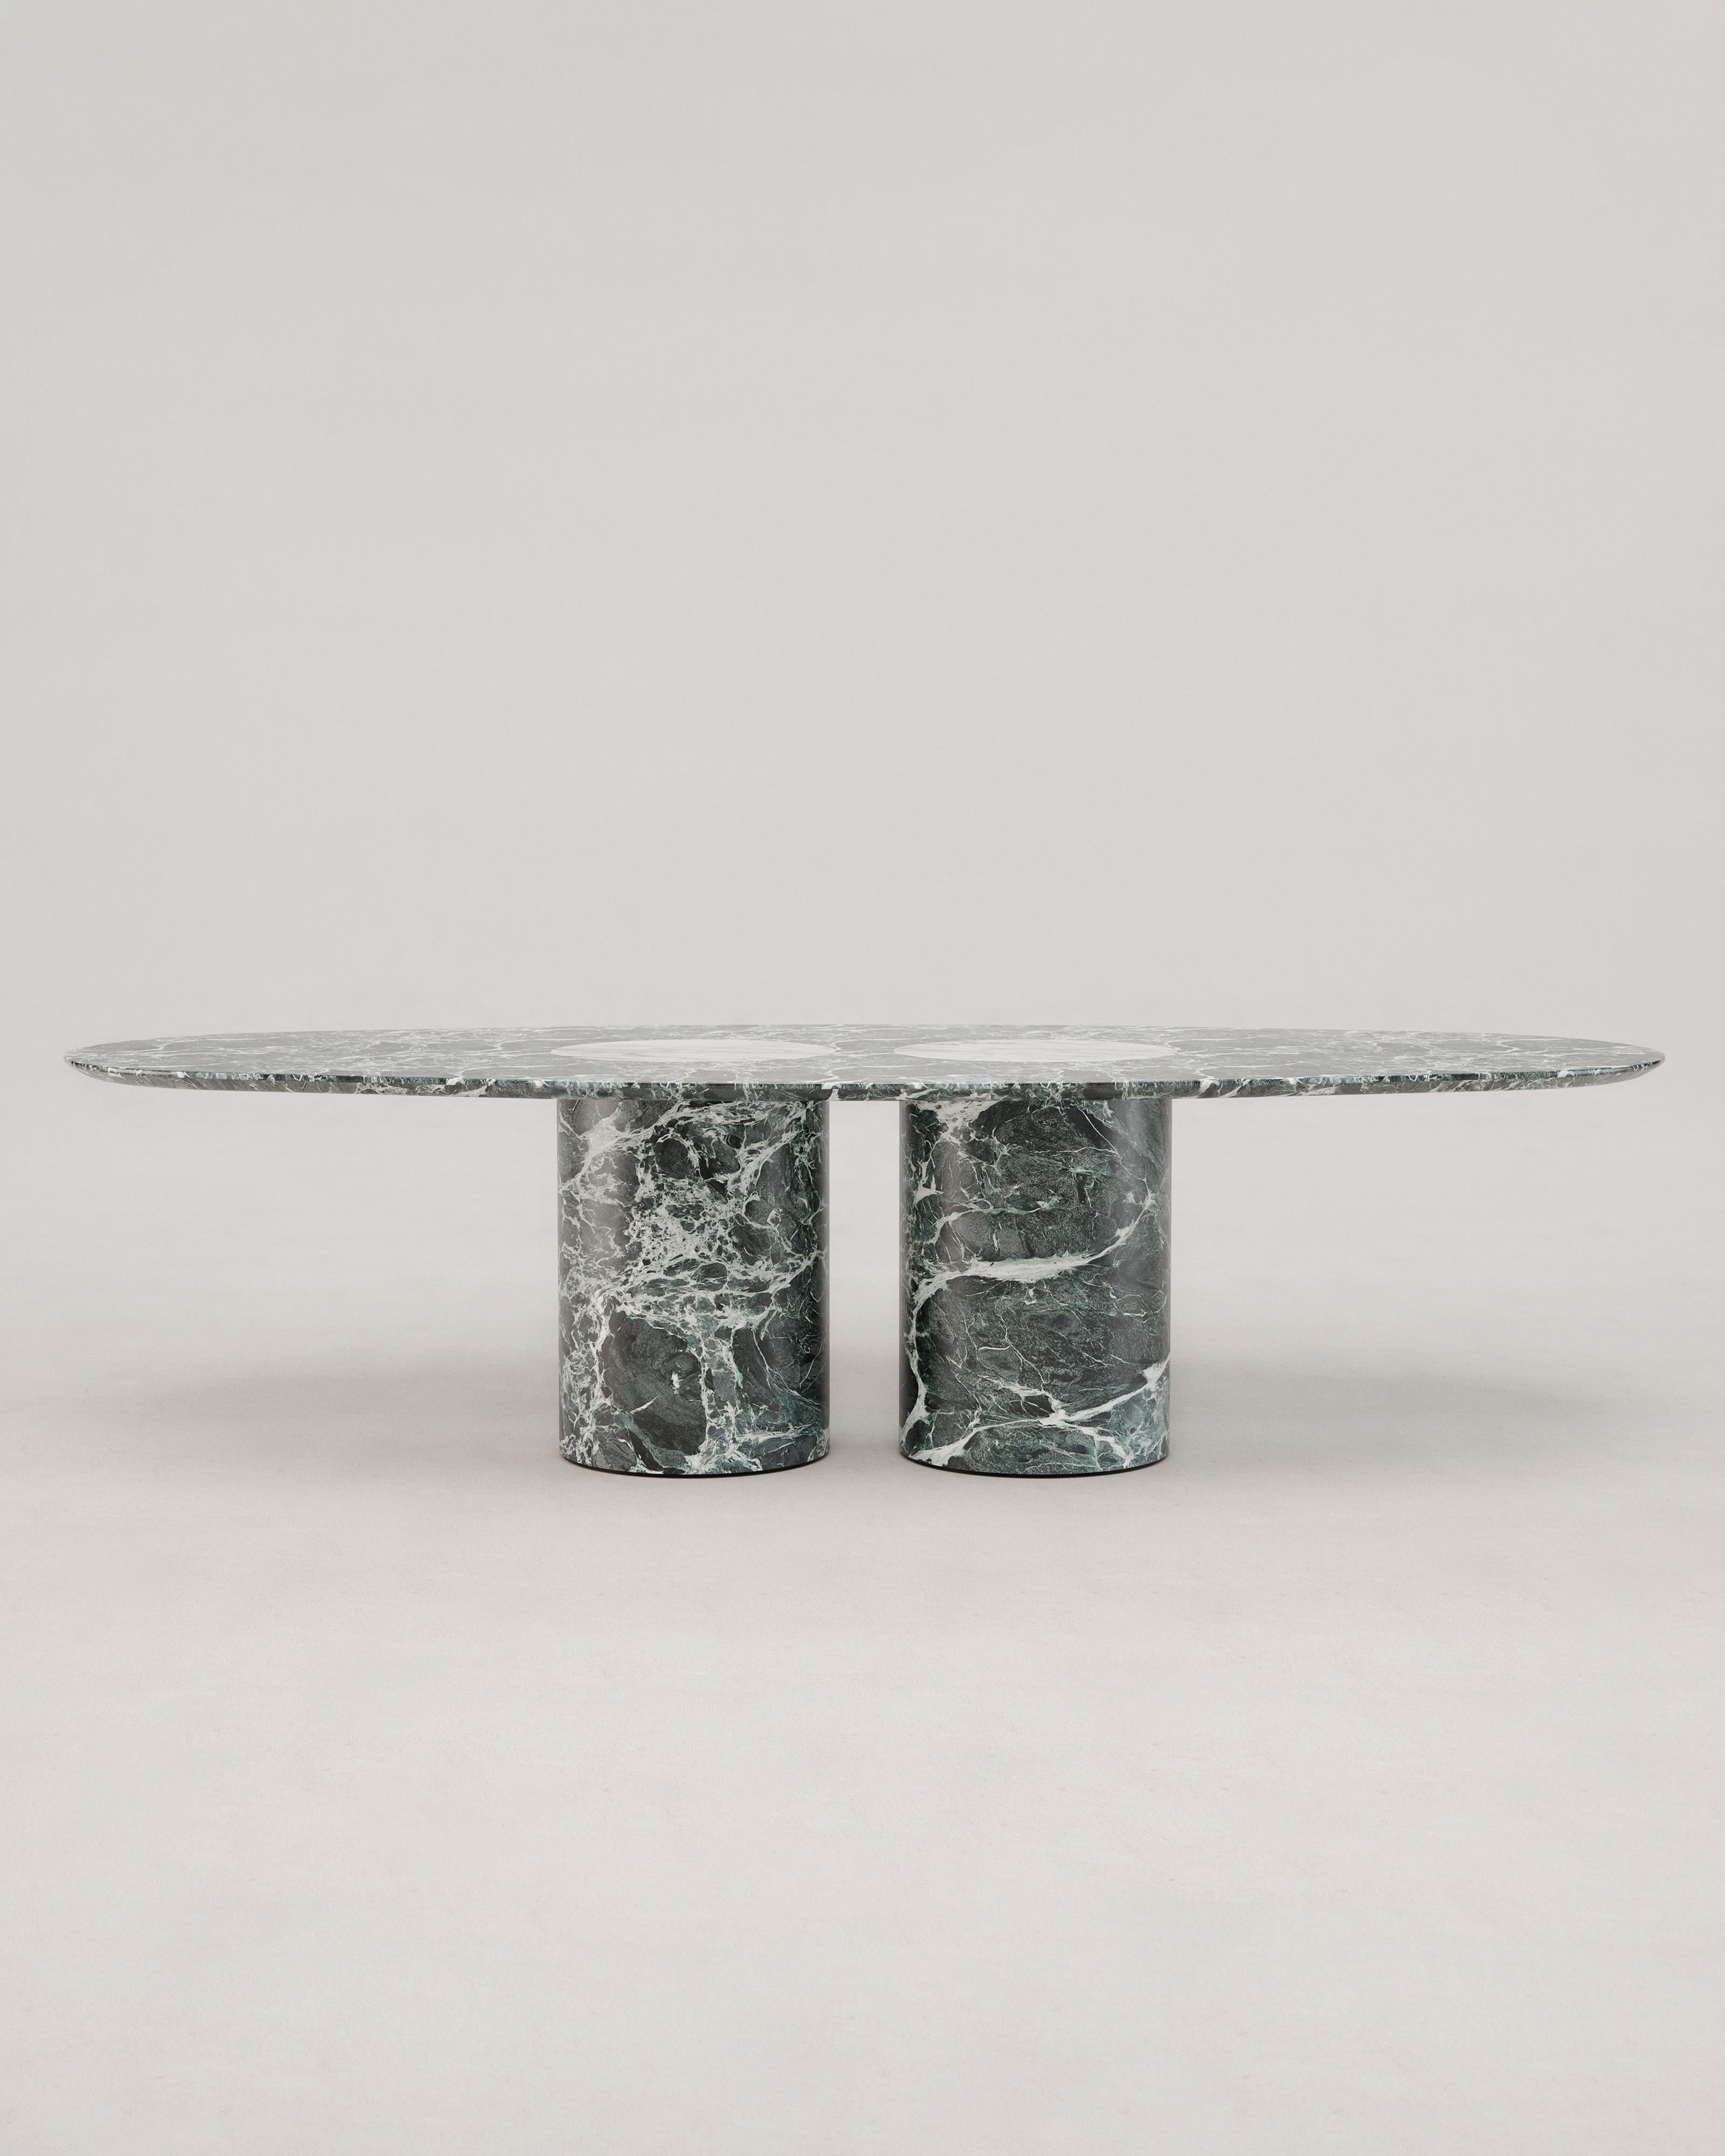 Salvante D1 dining table, Bianco Namibia Marble by Piotr Dabrowa
Unique Piece
Dimensions: W 280 cm x D 130 cm x H 74 cm.
Materials: Verde Alpi and Bianco Namibia marbles.
Also available in: Verde Alpi, Crema Tirreno marble and Nero Calatorao,